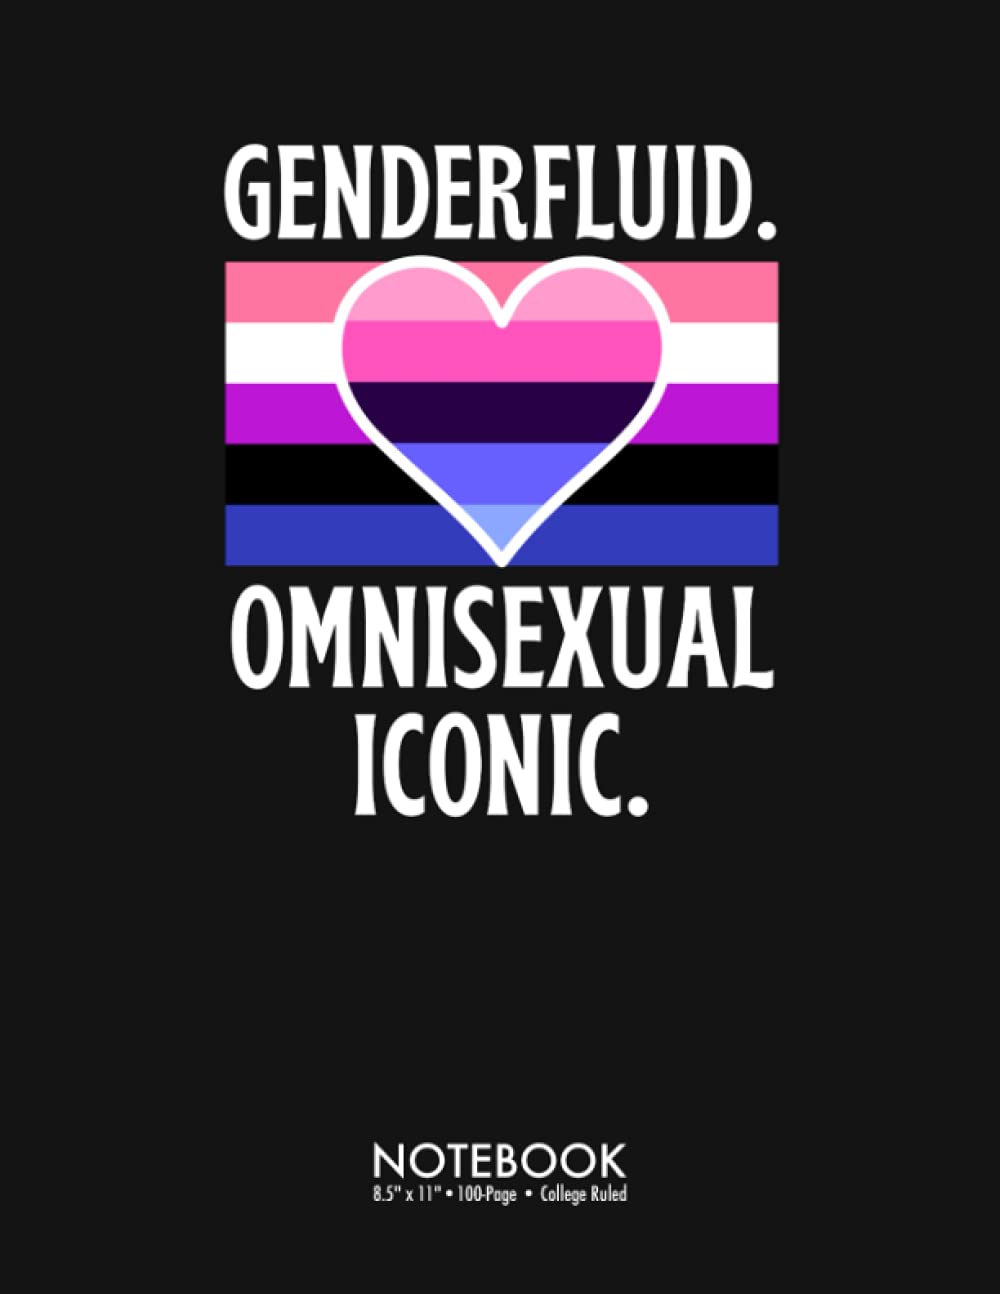 Genderfluid Omnisexual Iconic Notebook 8.5 X 11 Inch 100 Page College Ruled: Genderfluid Pride Flag Stuff 100 Page College Ruled Diary Lined Journal. Back To School Gift Large (8.5 X 11 Inch)